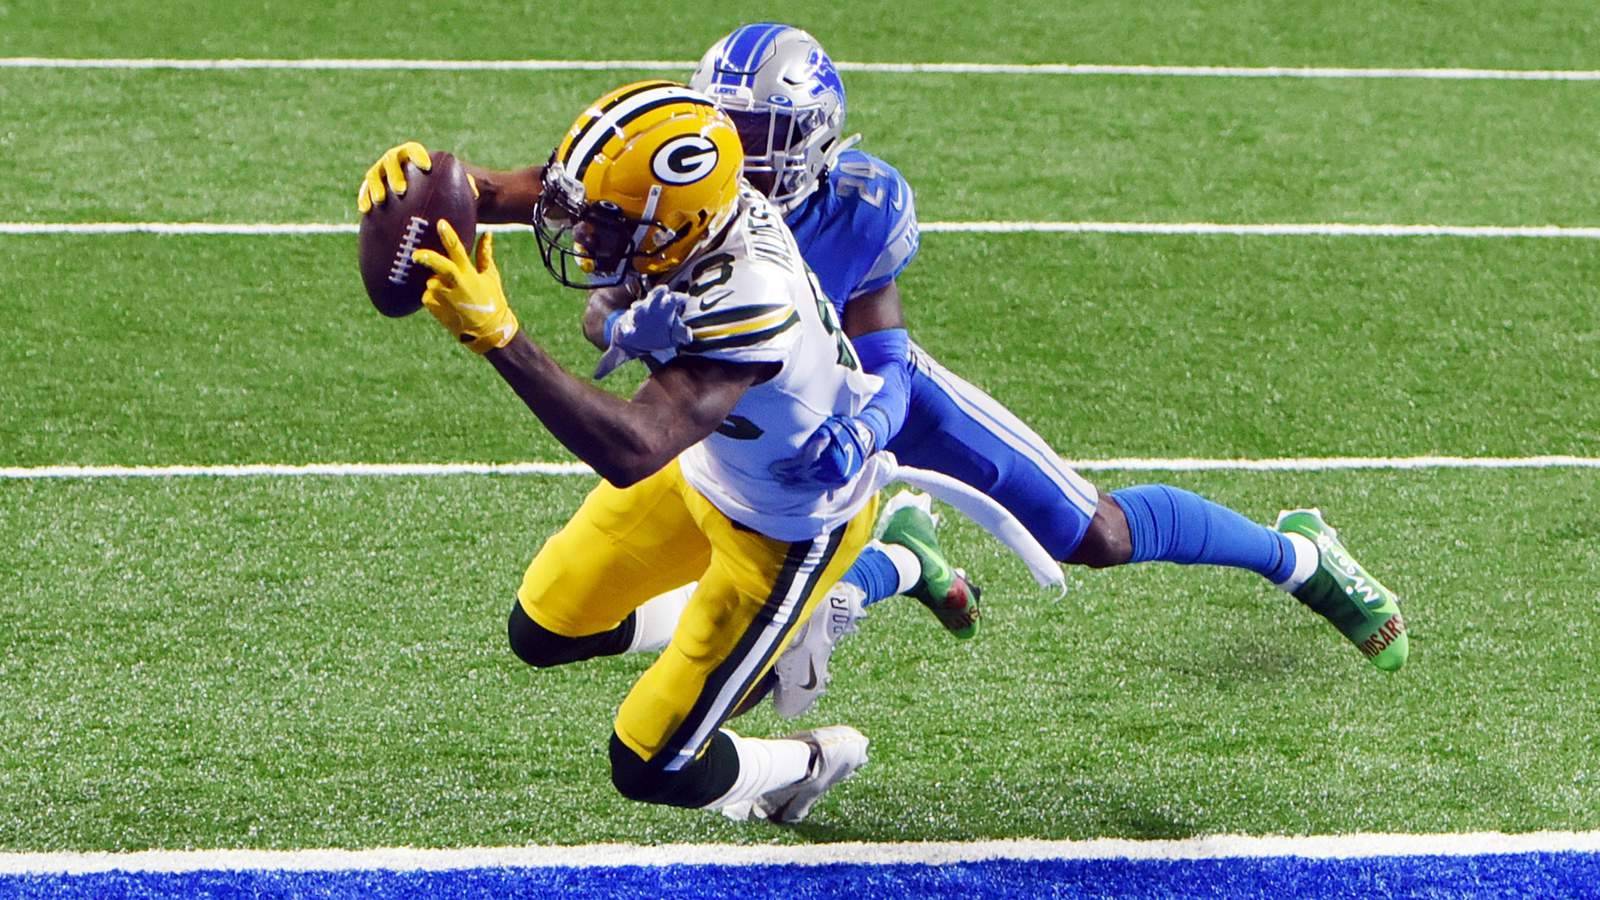 Packers beat Lions in Detroit, clinch division title